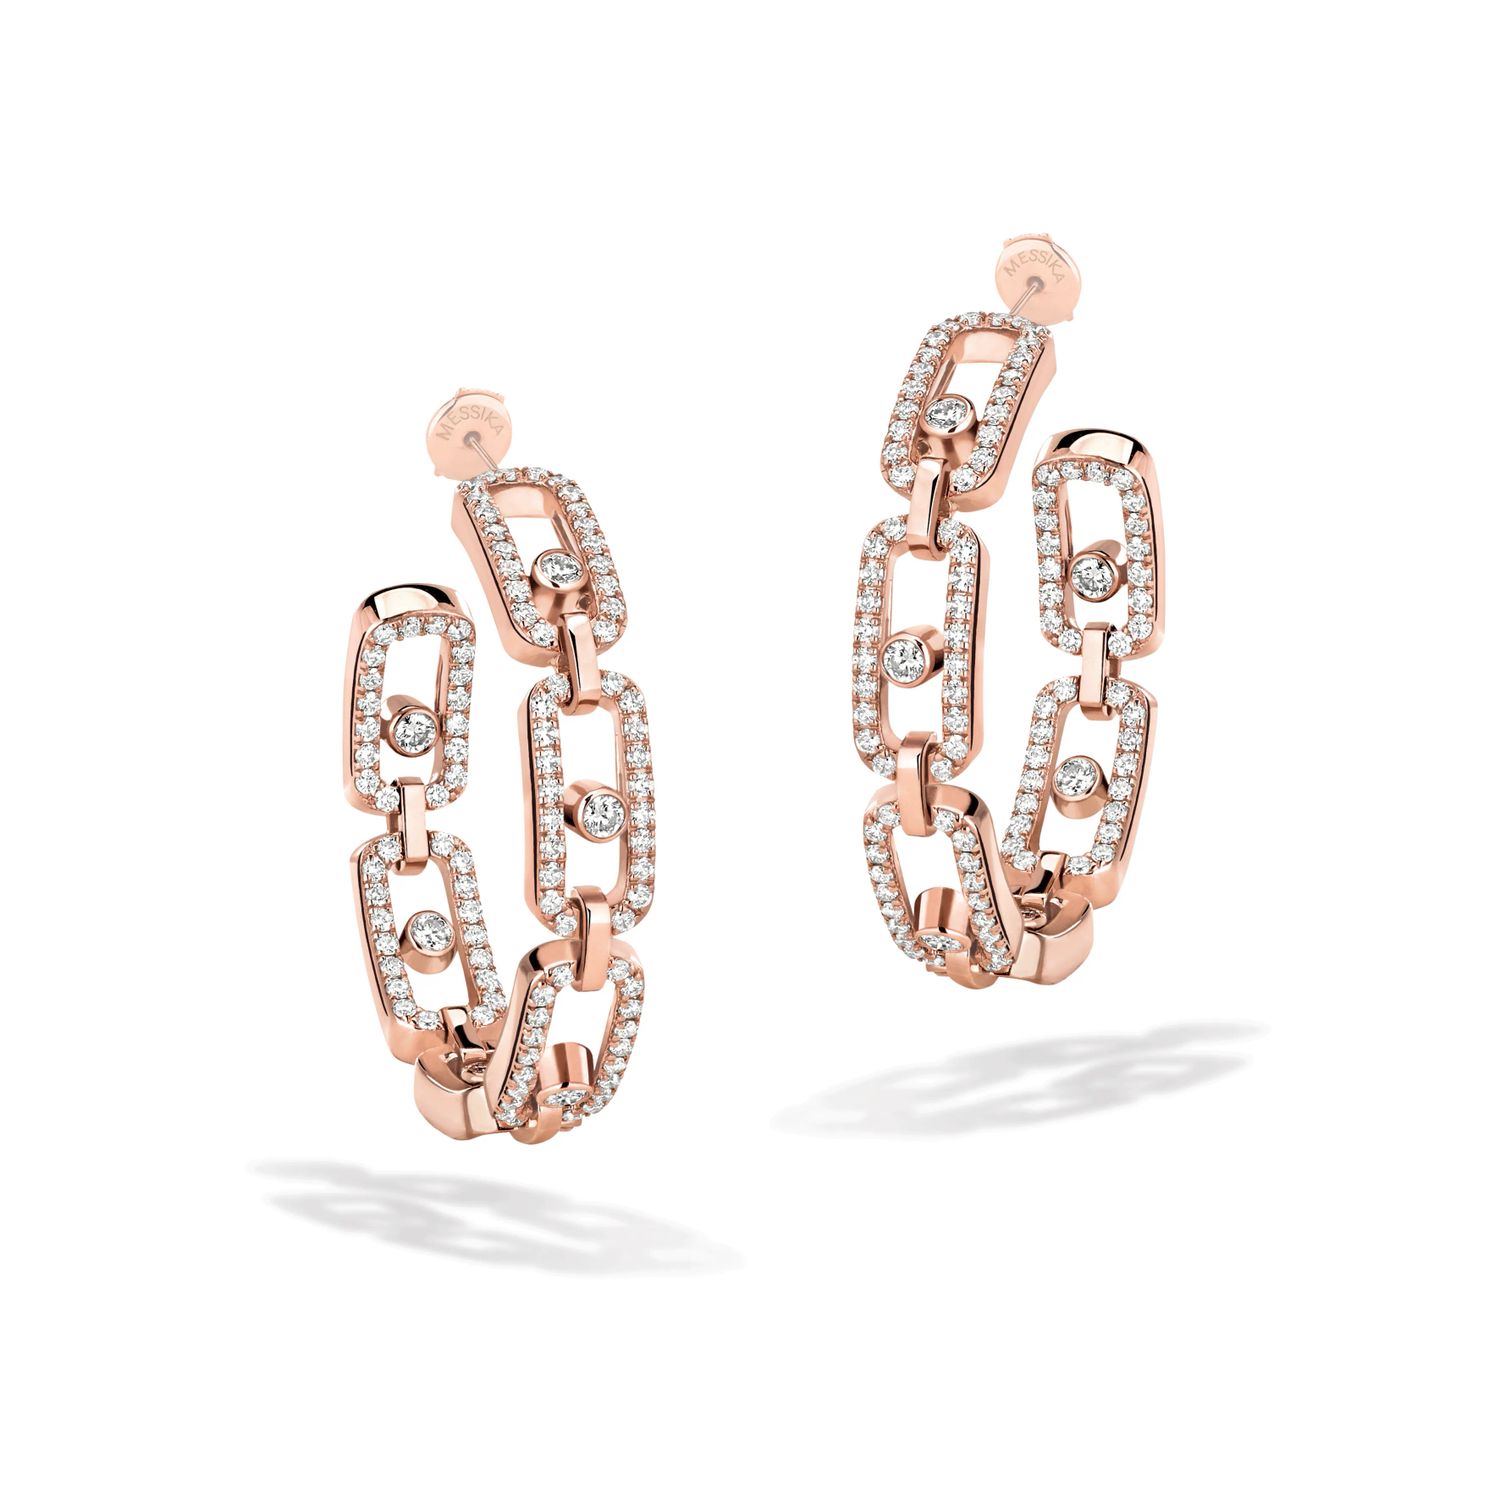 Messika 18kt Rose Gold Move Link PM Hoop Earrings